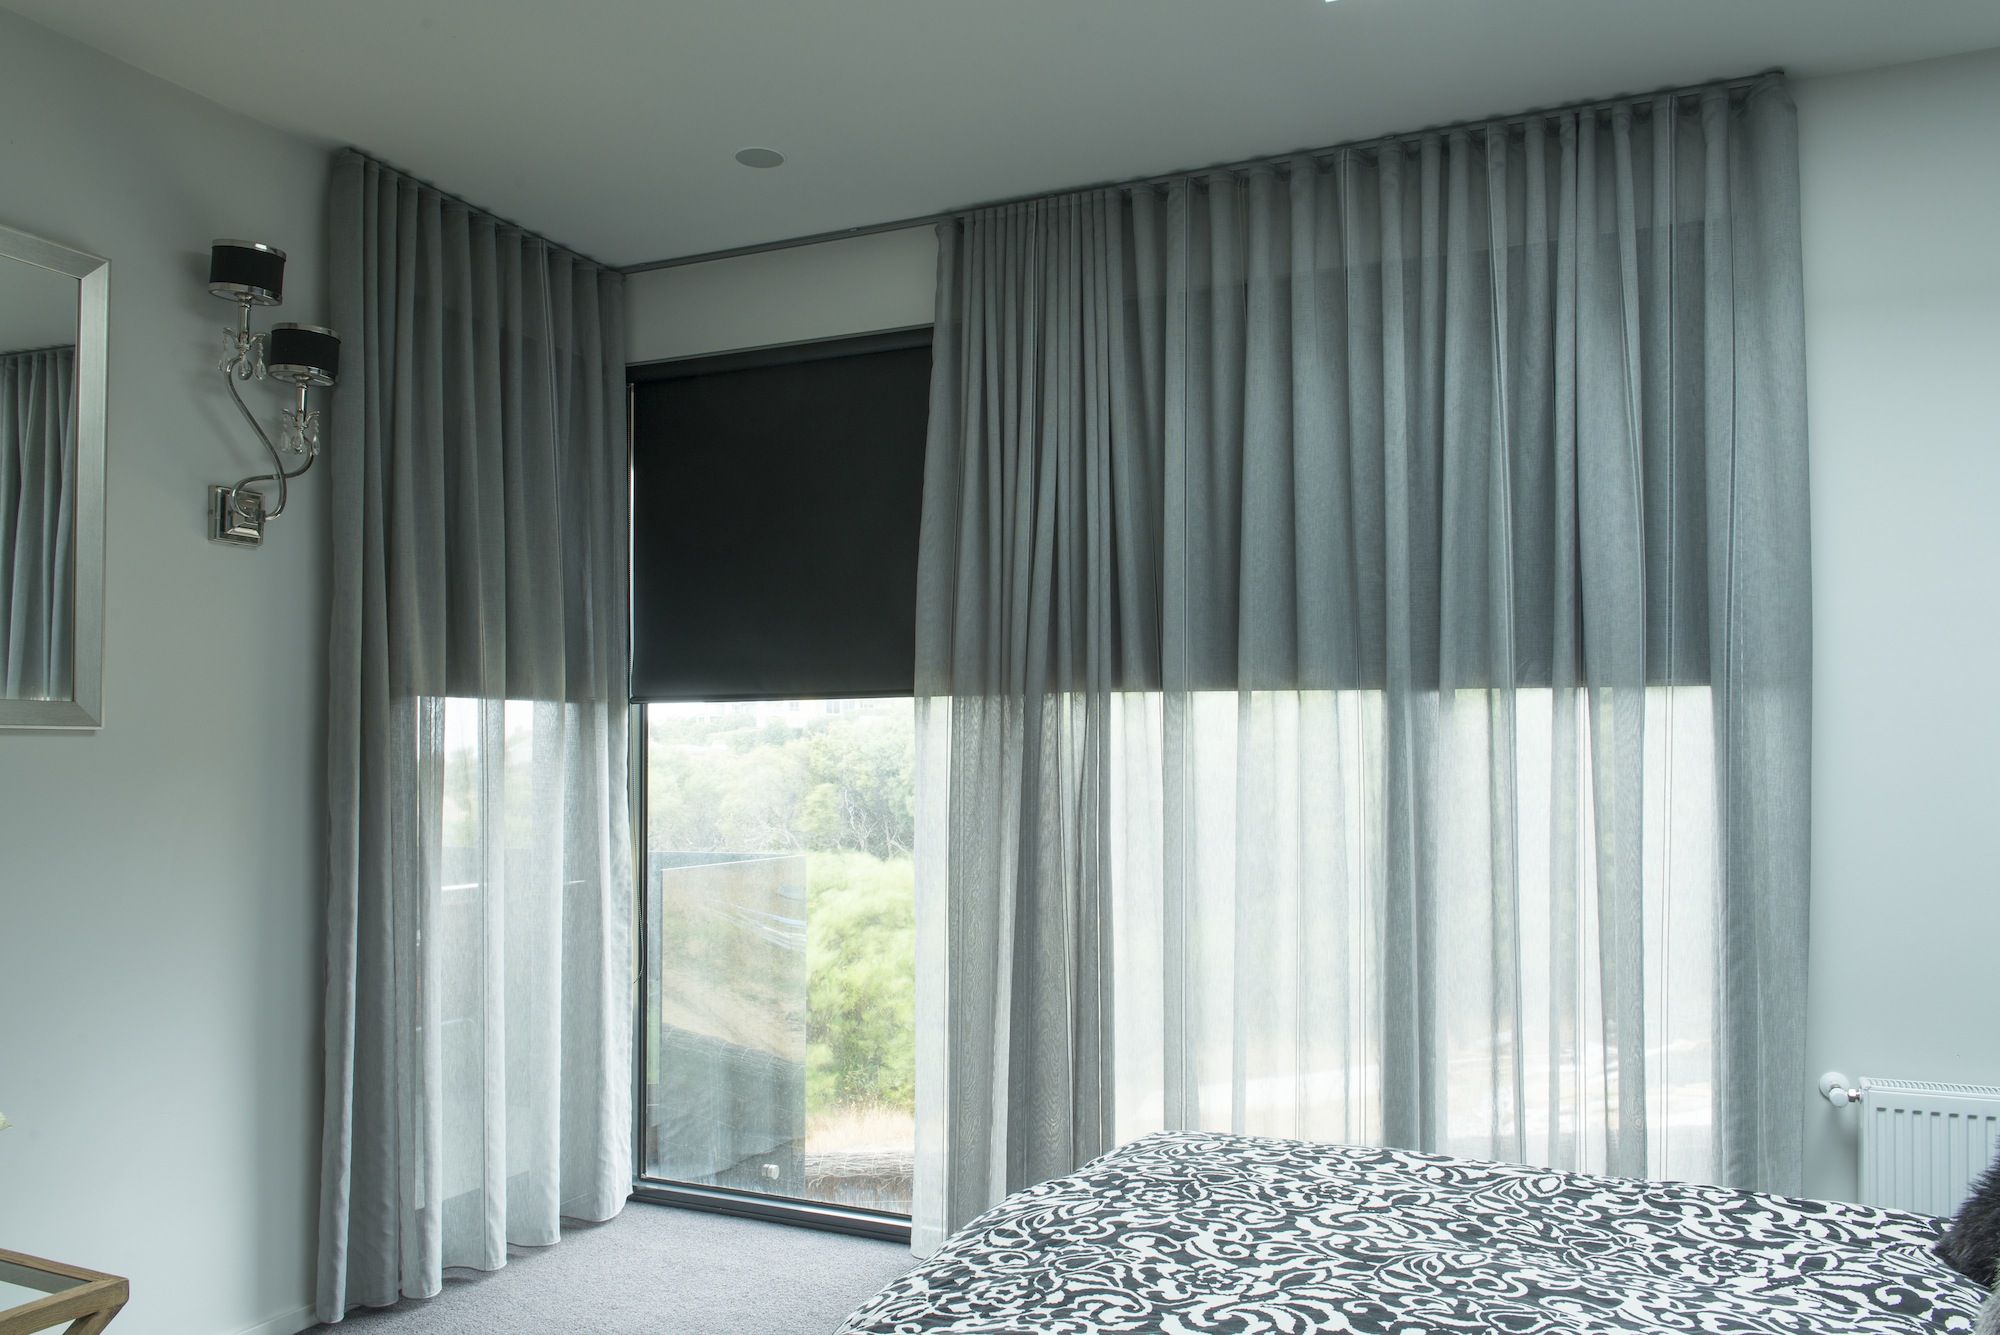 Get the Best Quality Curtains and Blinds in Abu Dhabi